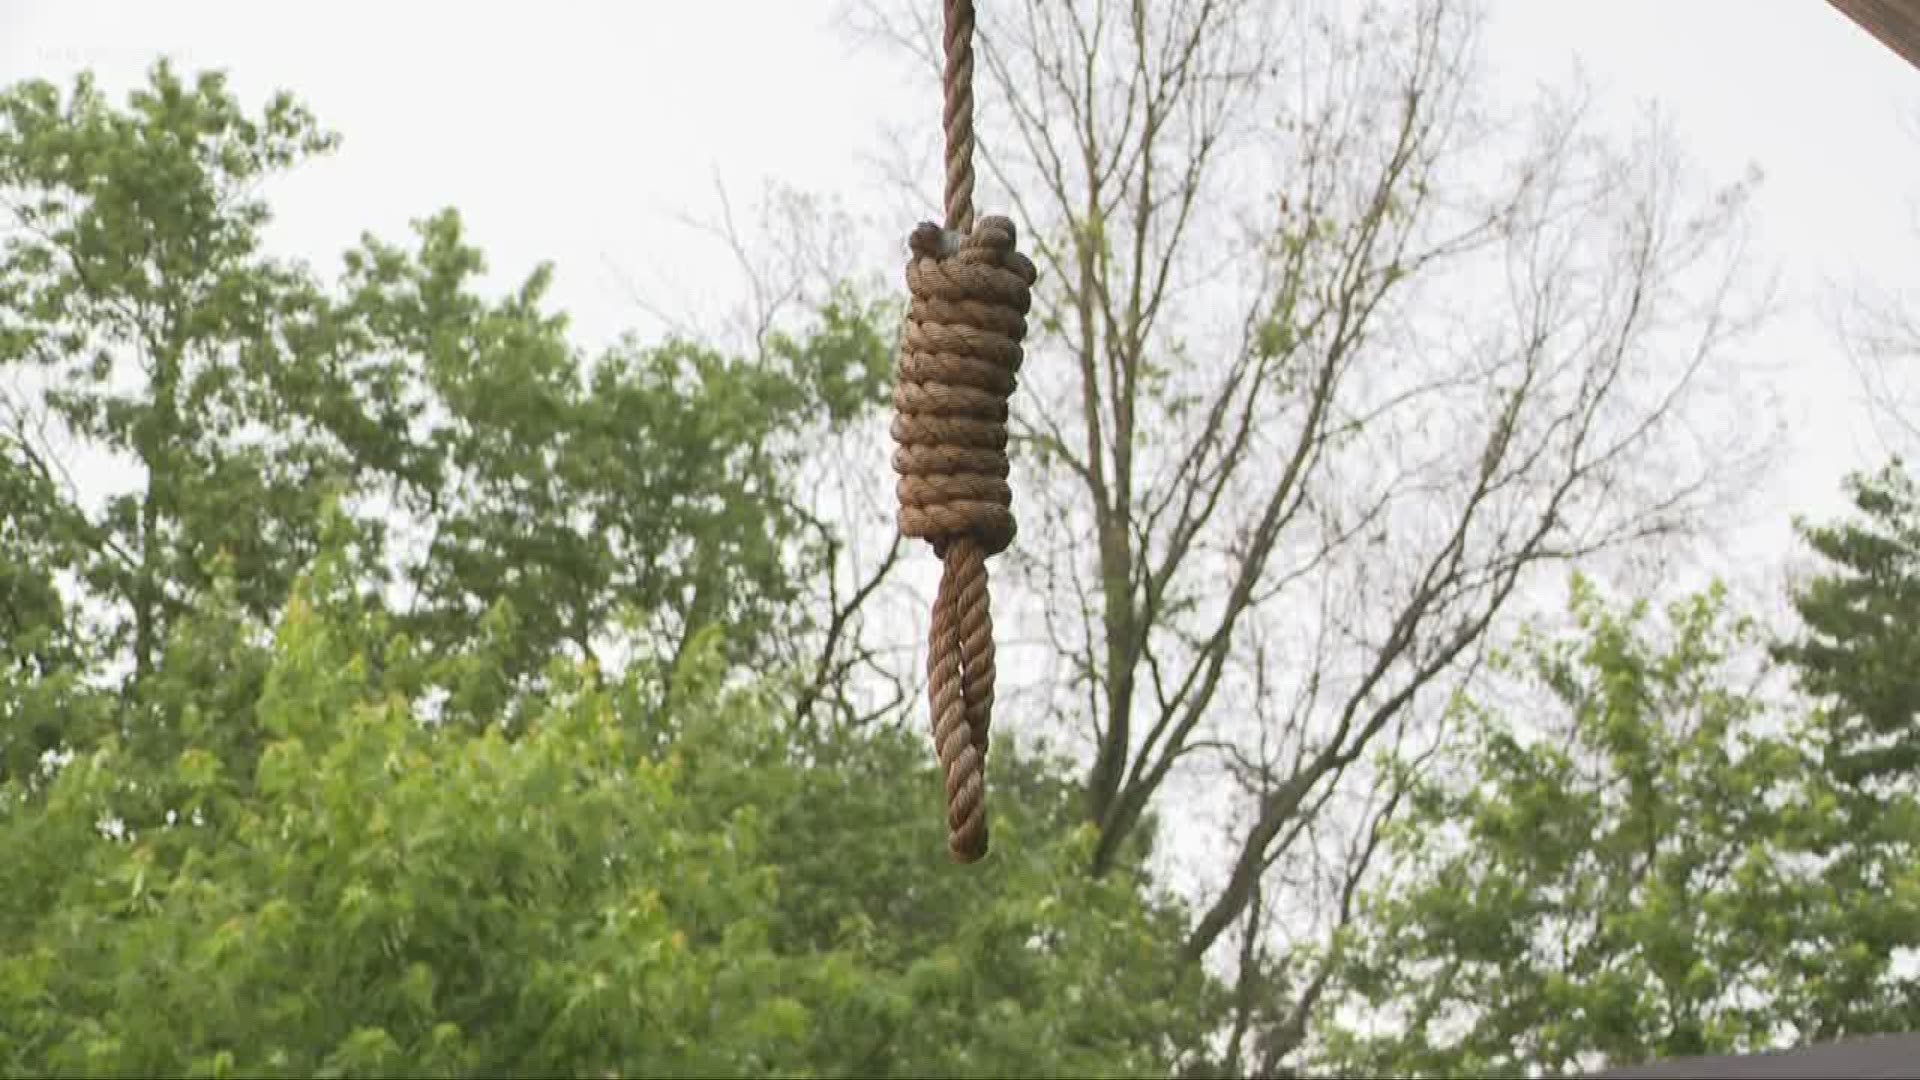 On the corner of Bennett and Walnut Street in Ravenna, there's a sight that has neighbors and passersby taken aback. A homeowner is displaying a noose hanging from a wooden post. It's clearly visible from the road, but on private property.